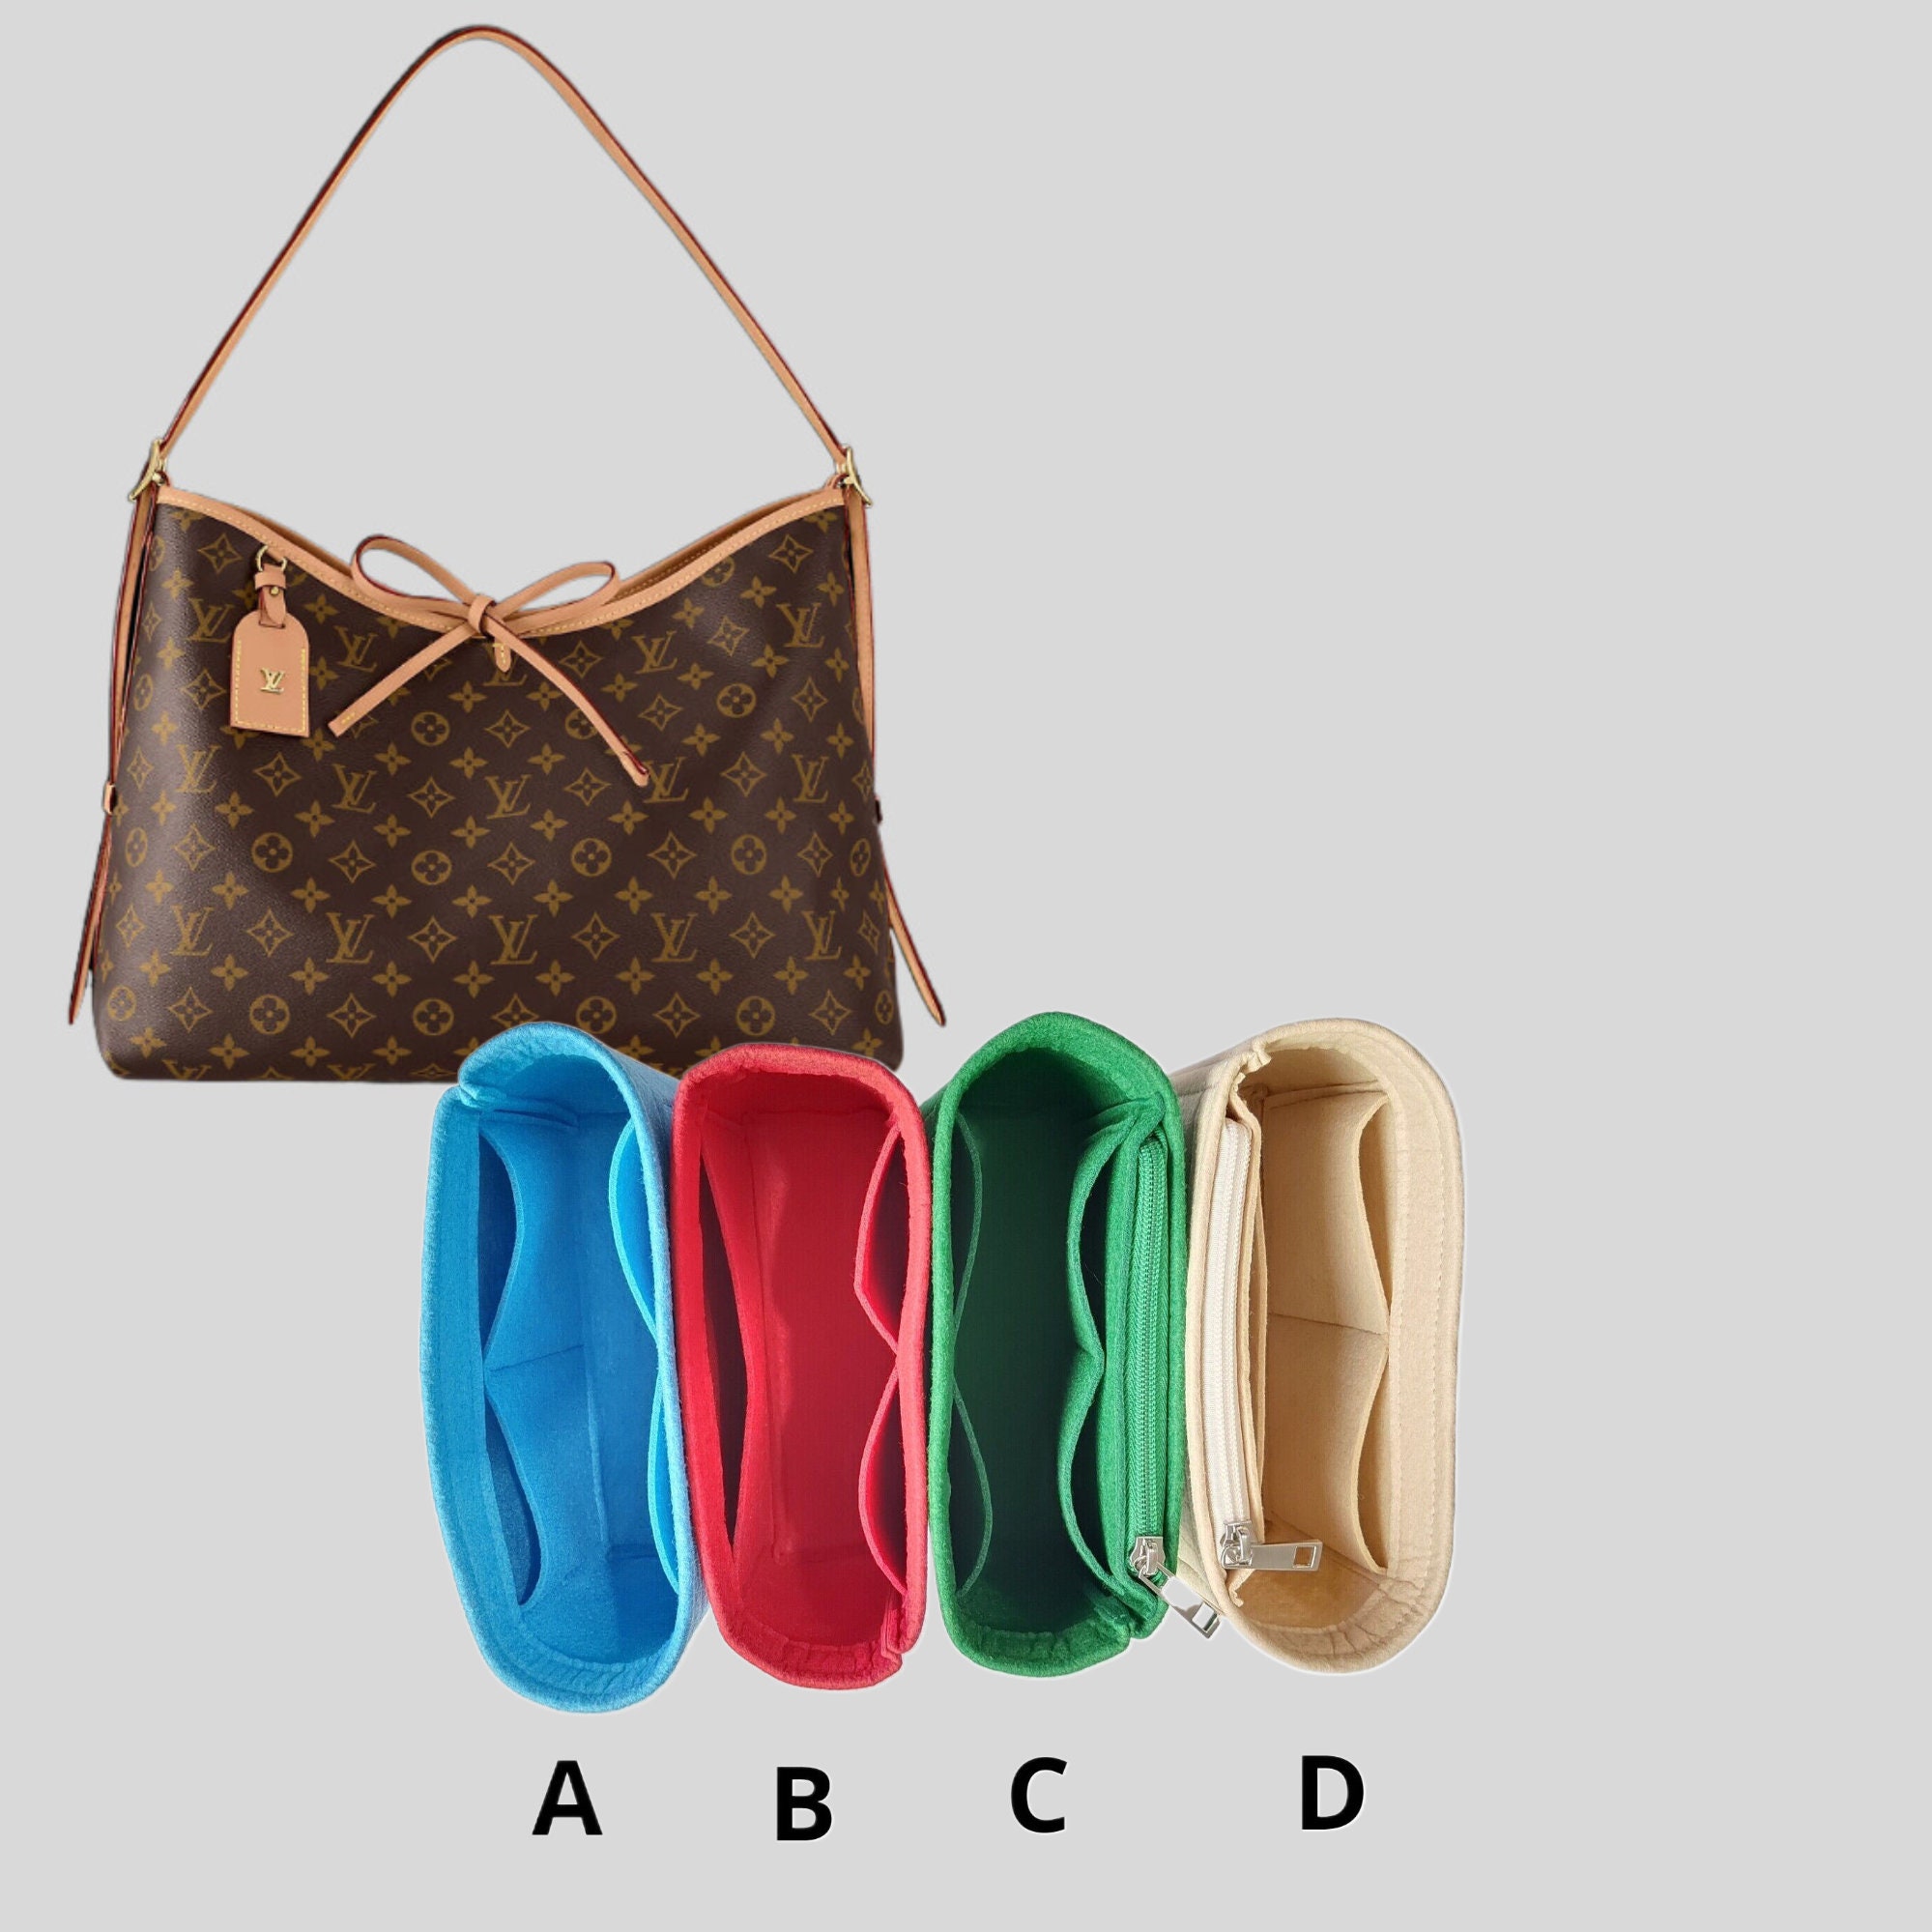 Bag and Purse Organizer with Singular Style for Louis Vuitton Delightful